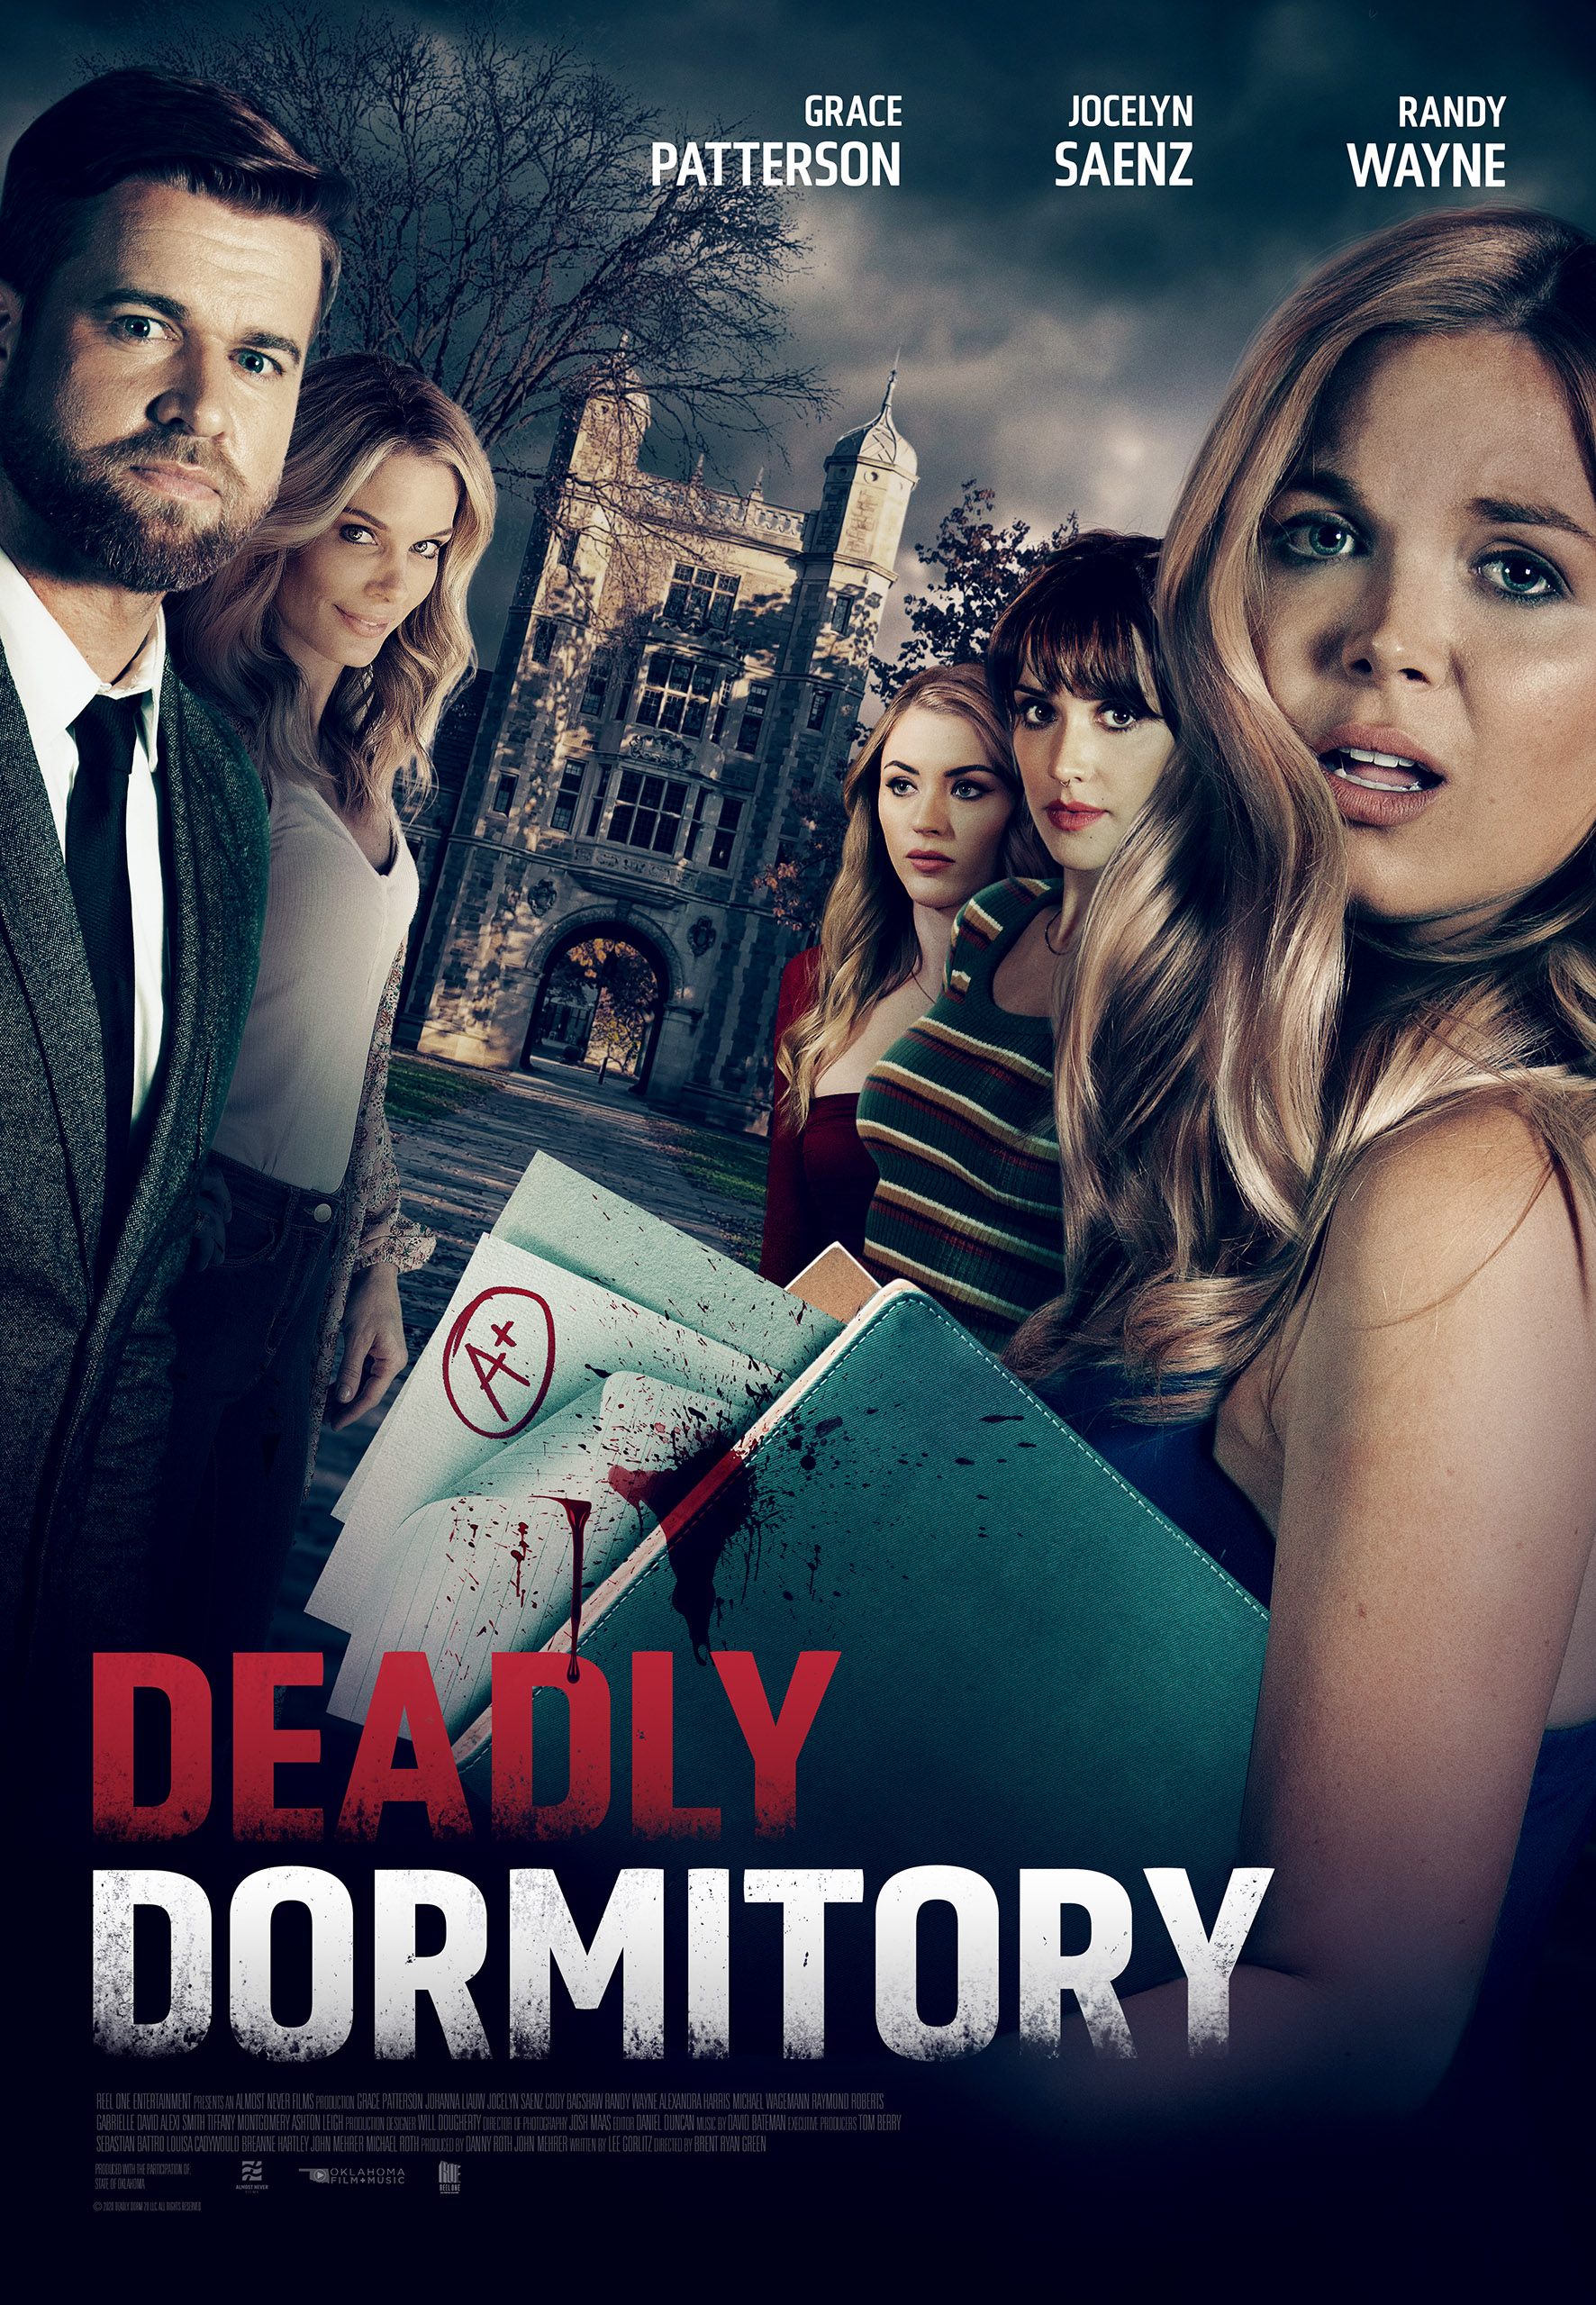 Deadly Dormitory - Reel One